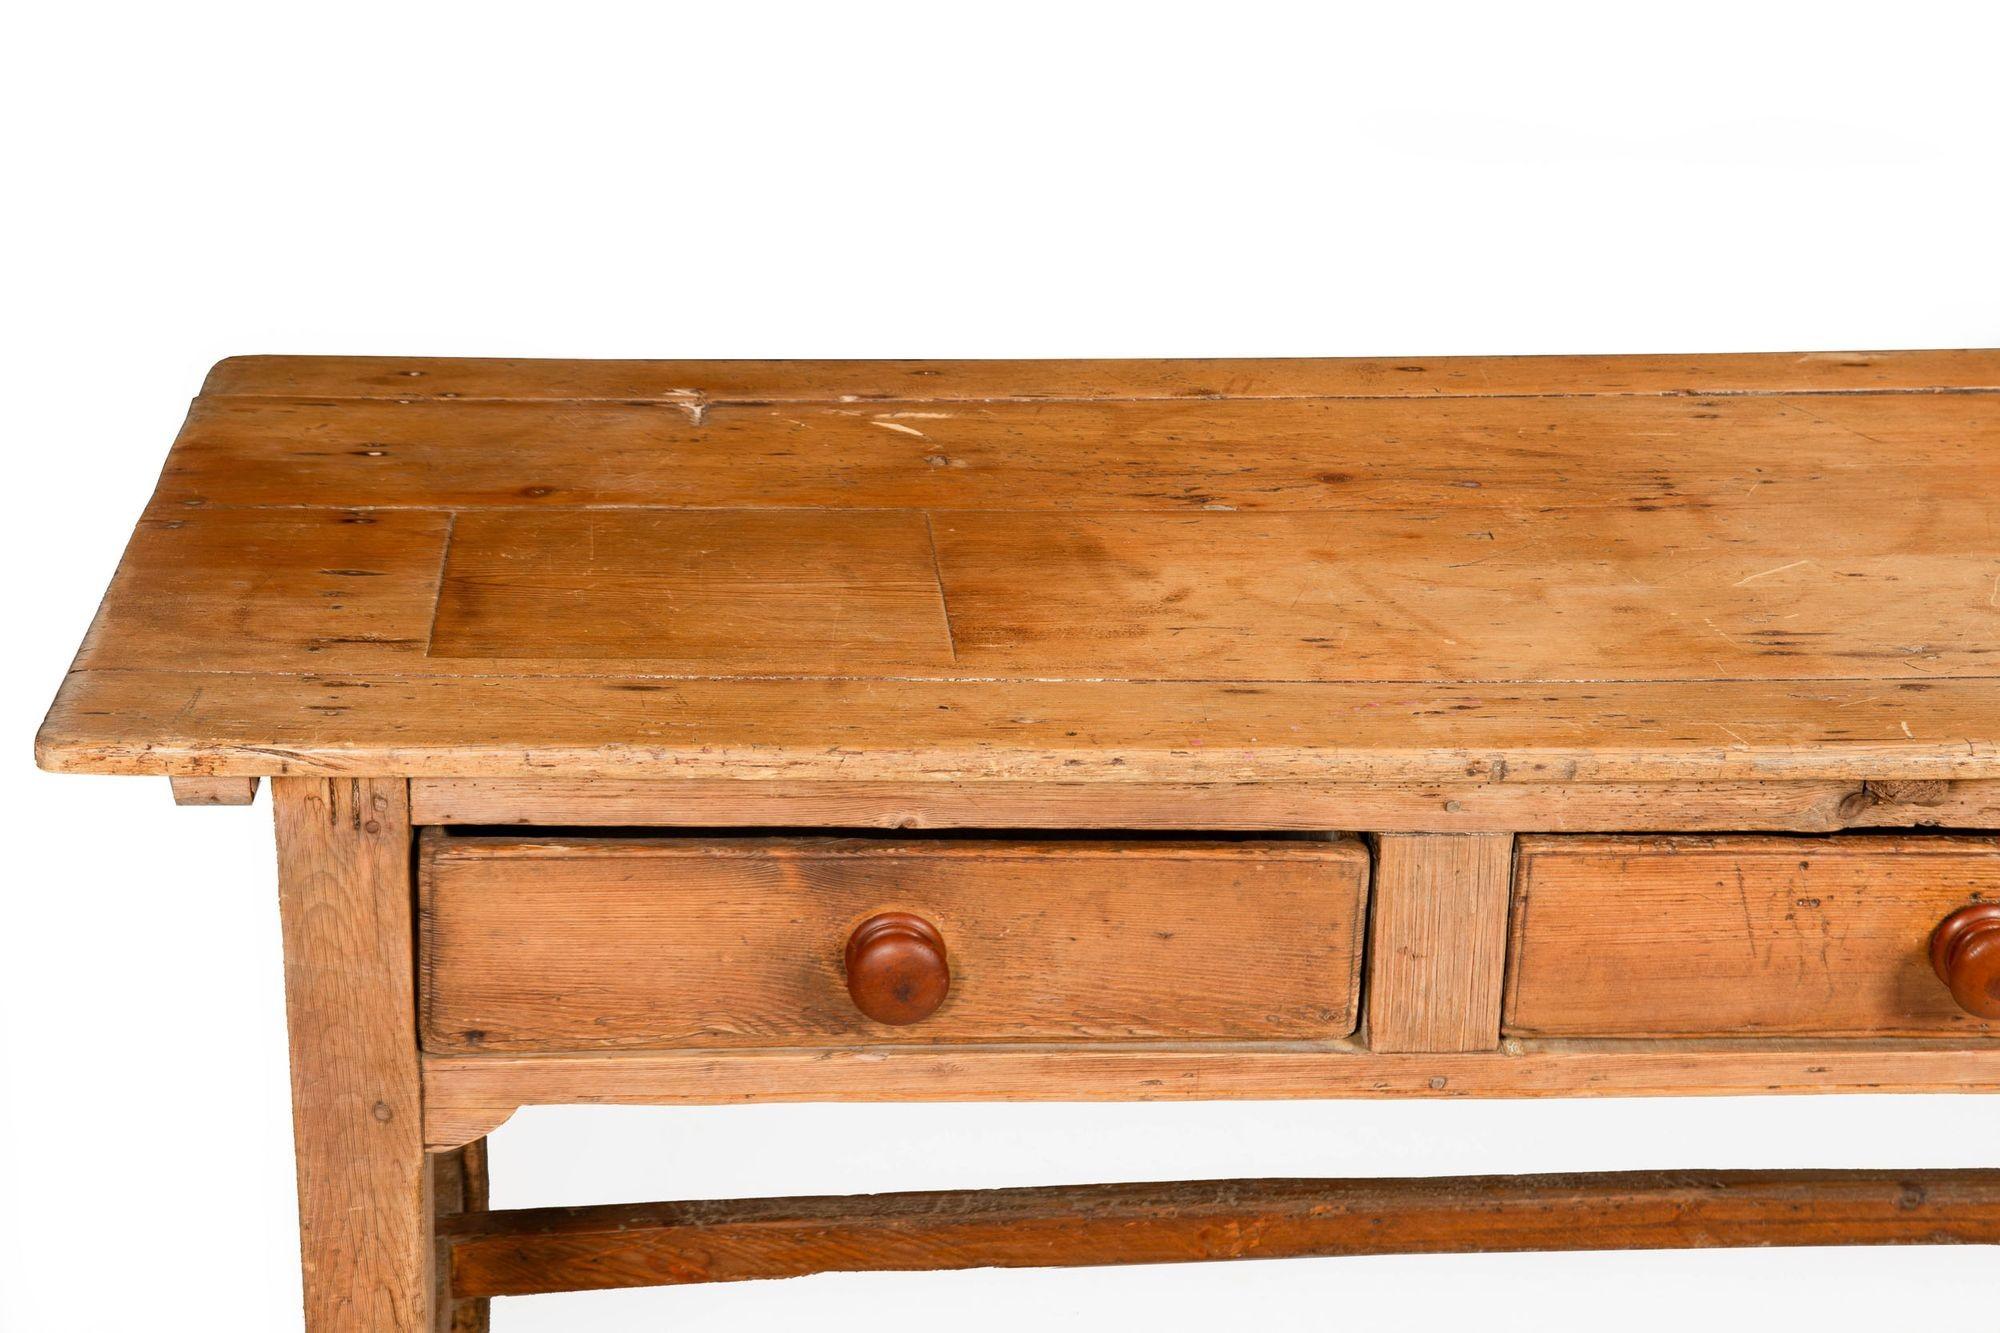 Worn and Patinated English Antique Pine Tavern Table Desk For Sale 3